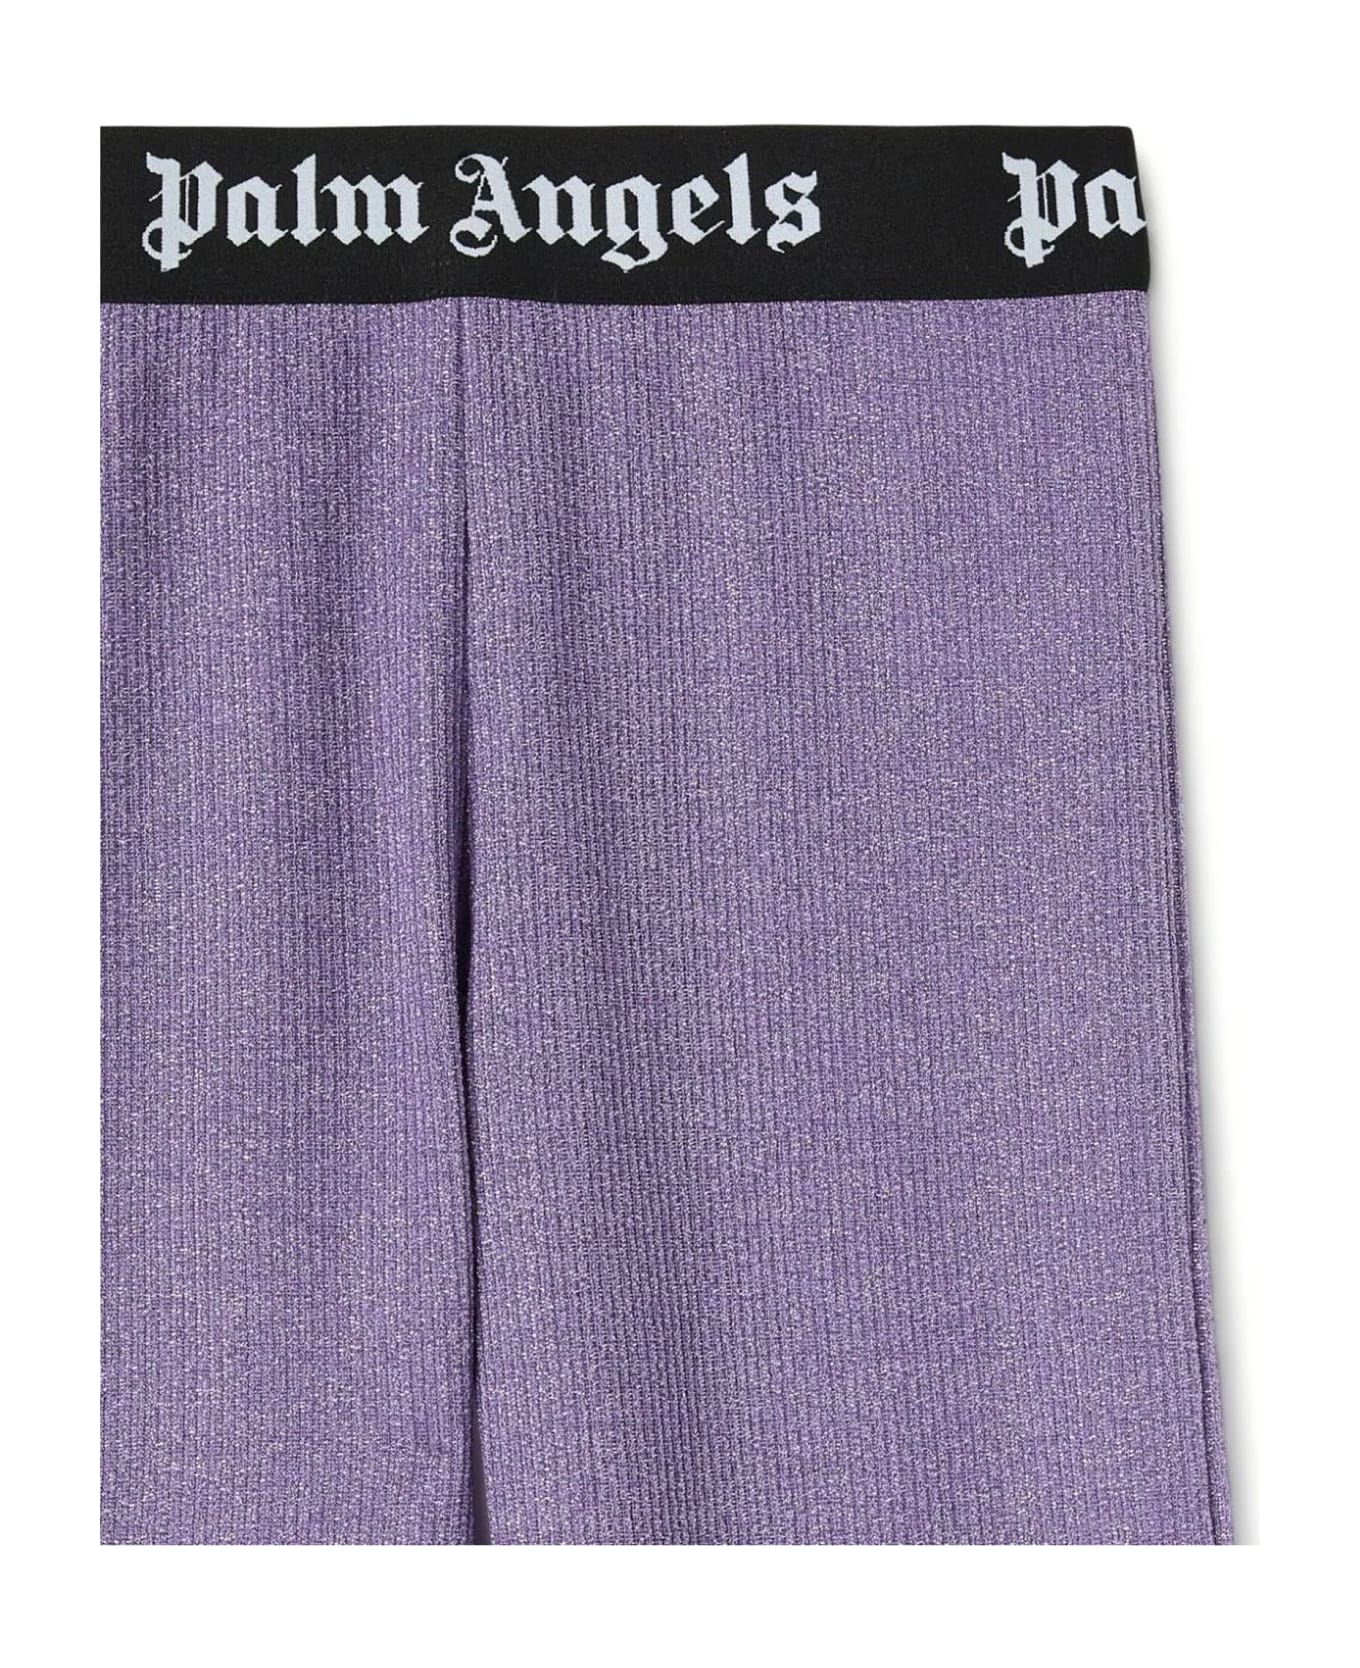 Palm Angels Trousers Lilac - Lilac